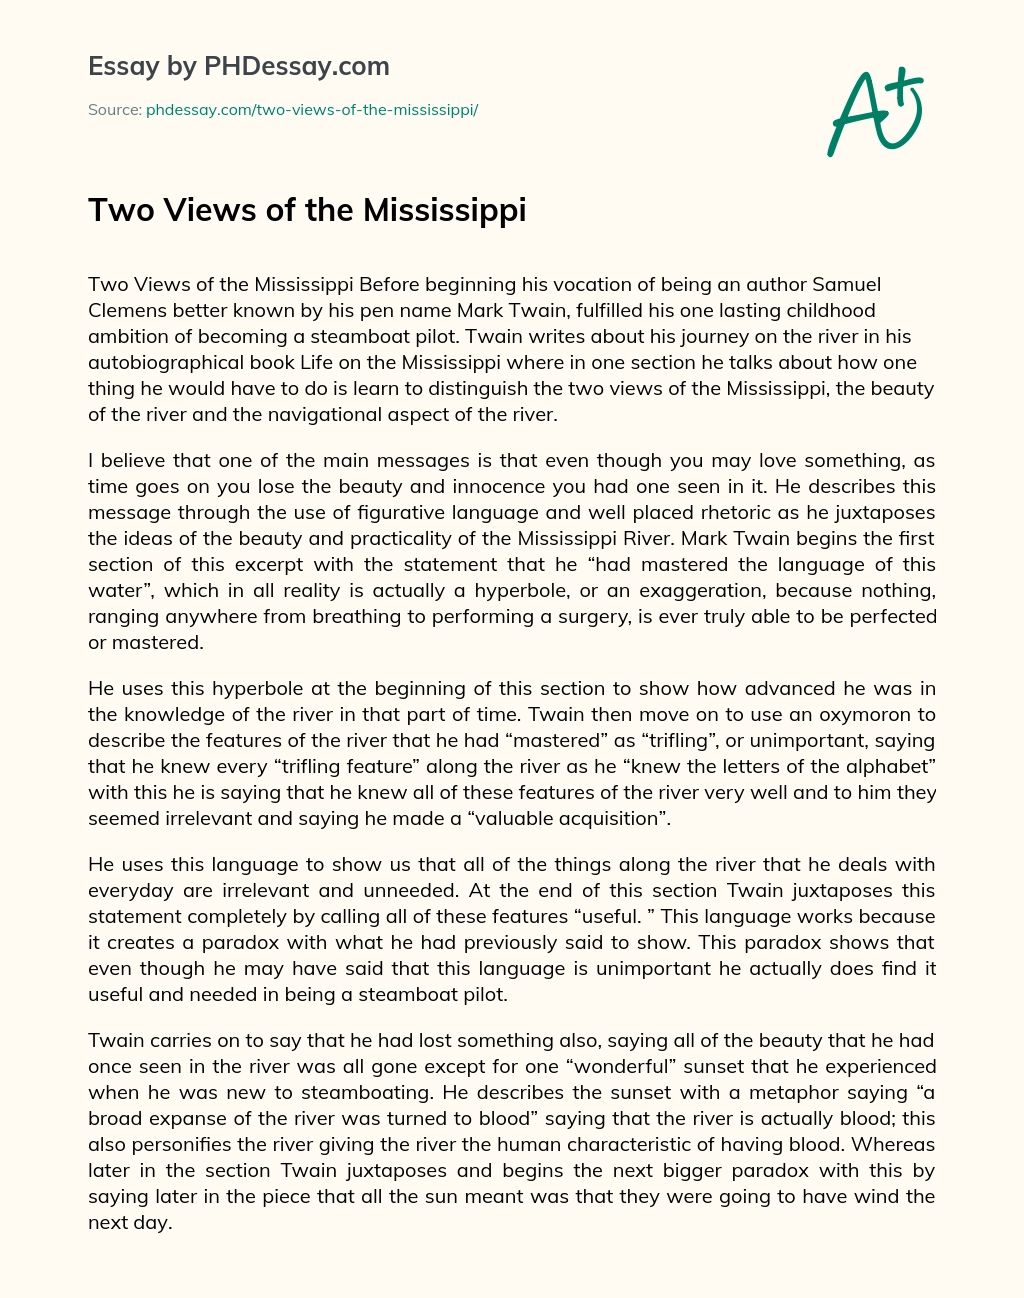 Two Views of the Mississippi essay